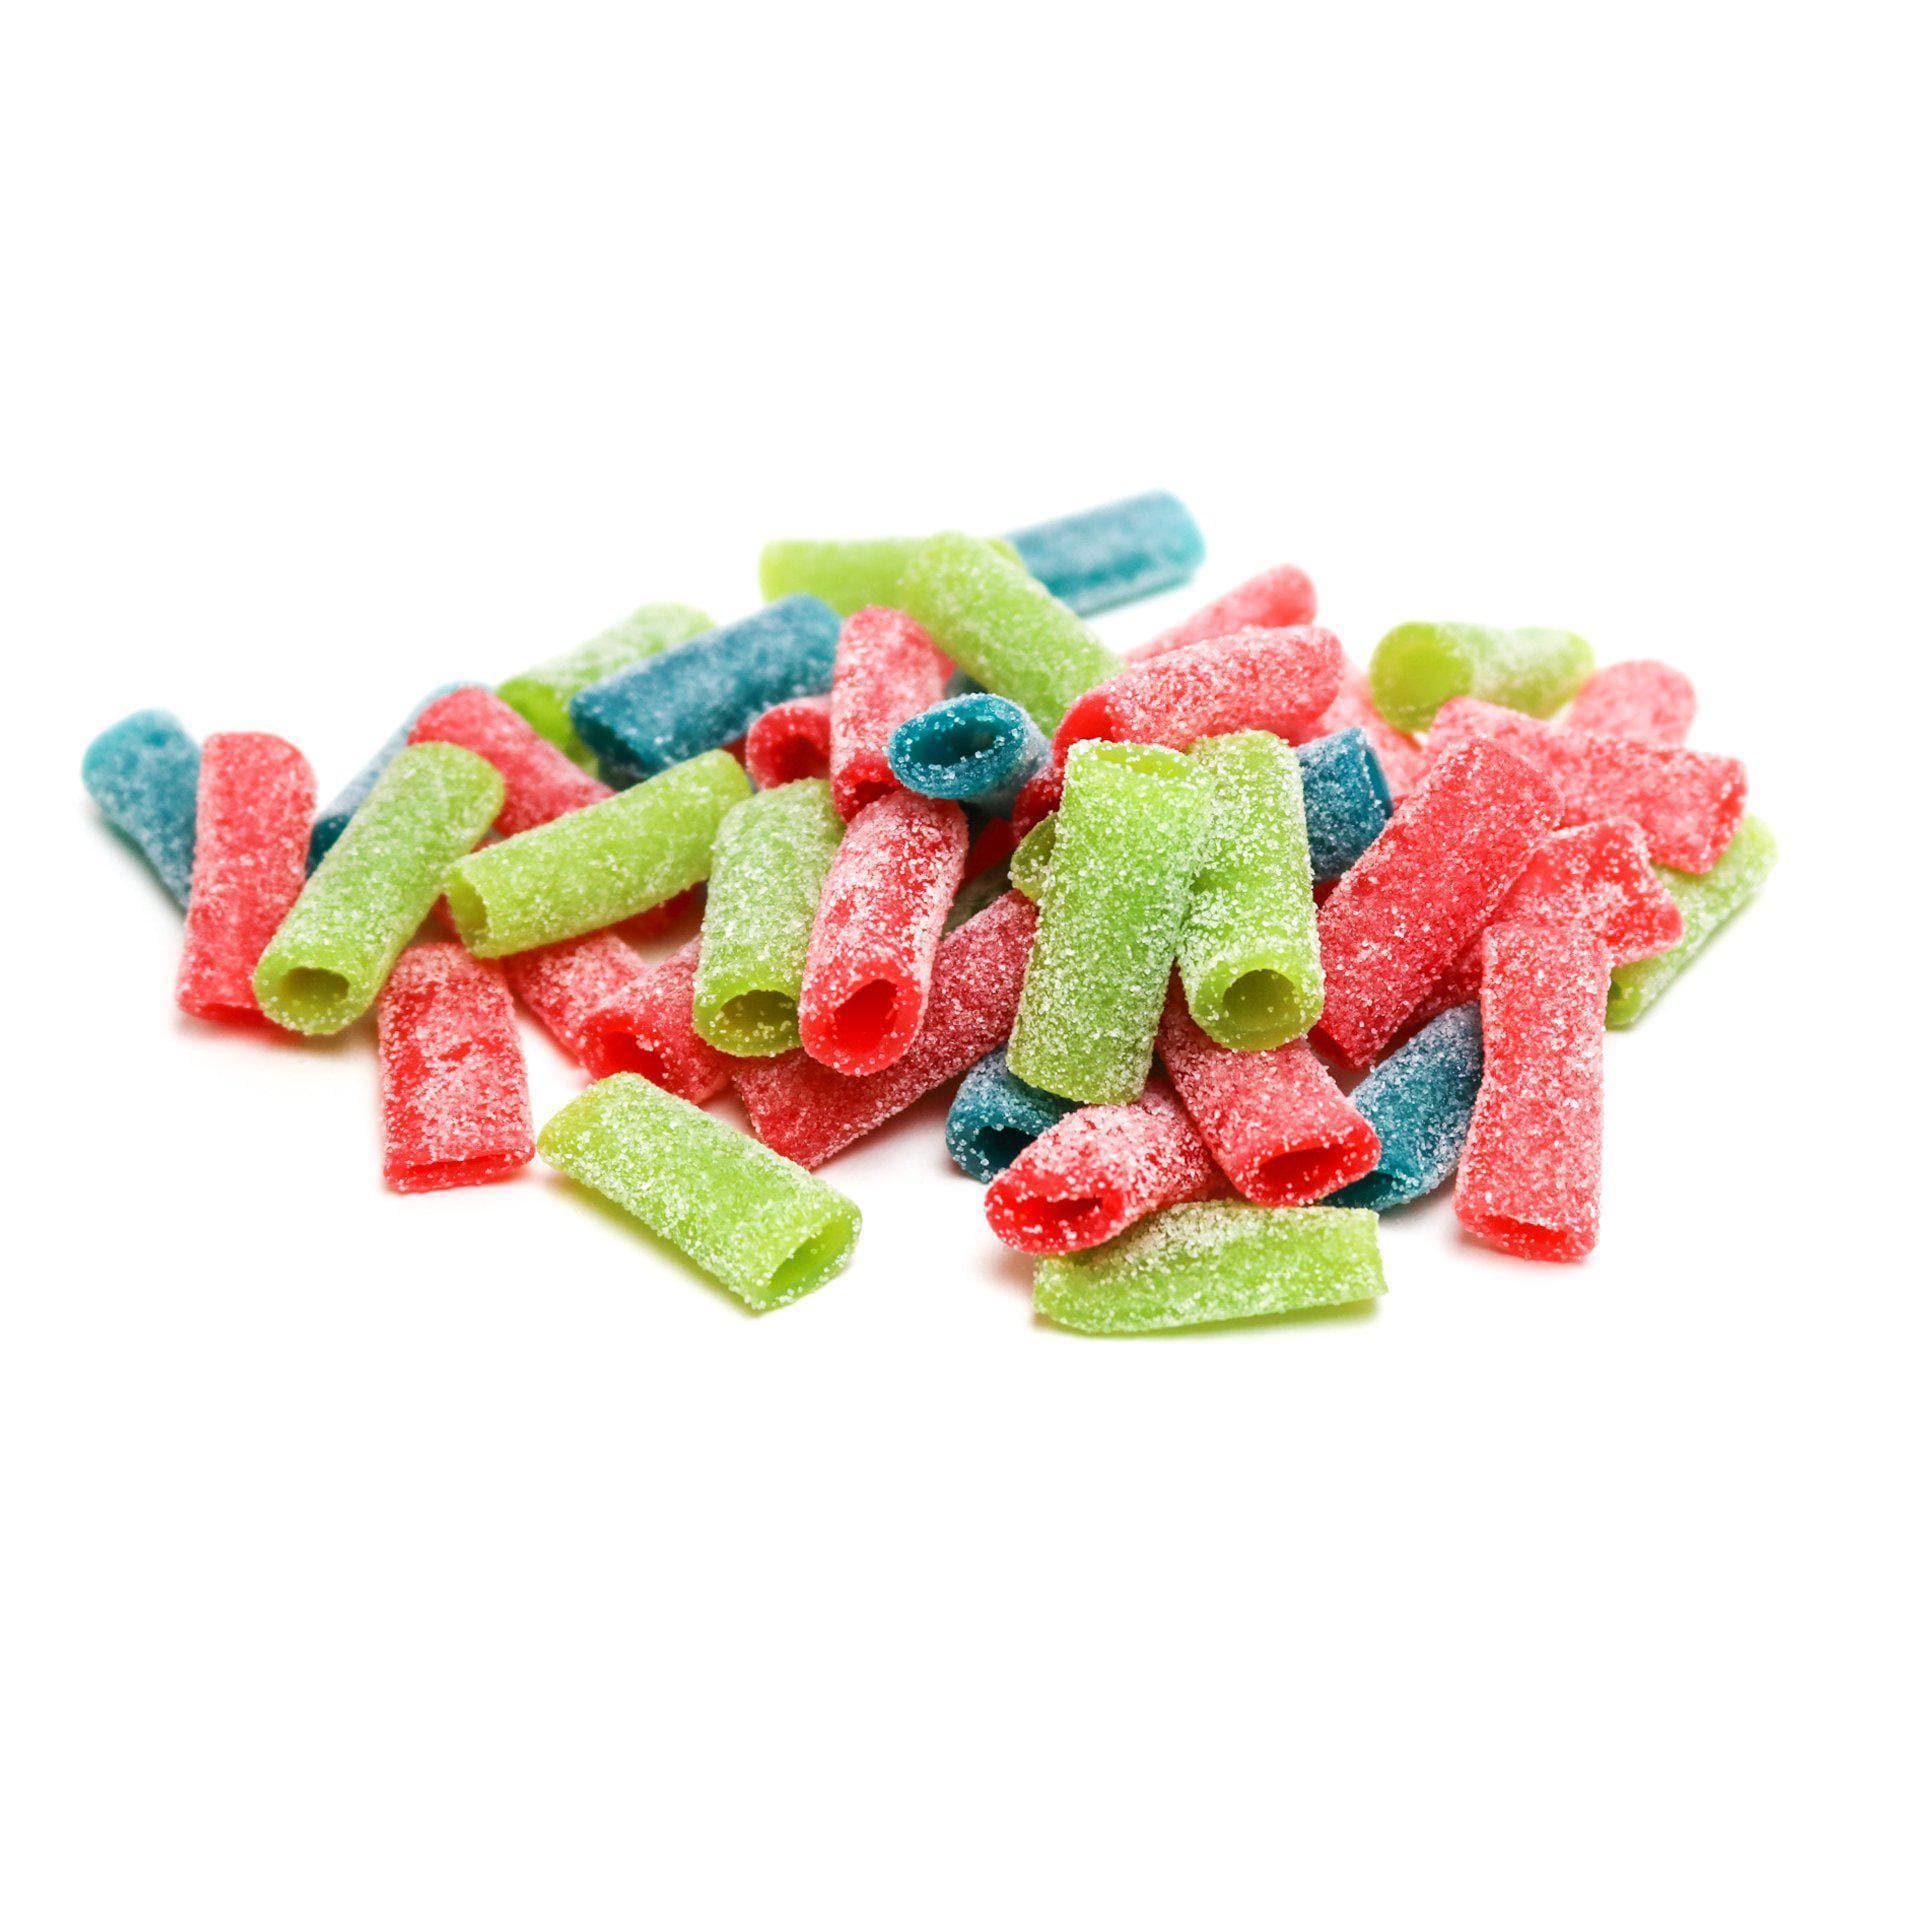 SOUR PUNCH Assorted Sour Candy Bites in Apple, Strawberry, and Blue Raspberry candy flavors